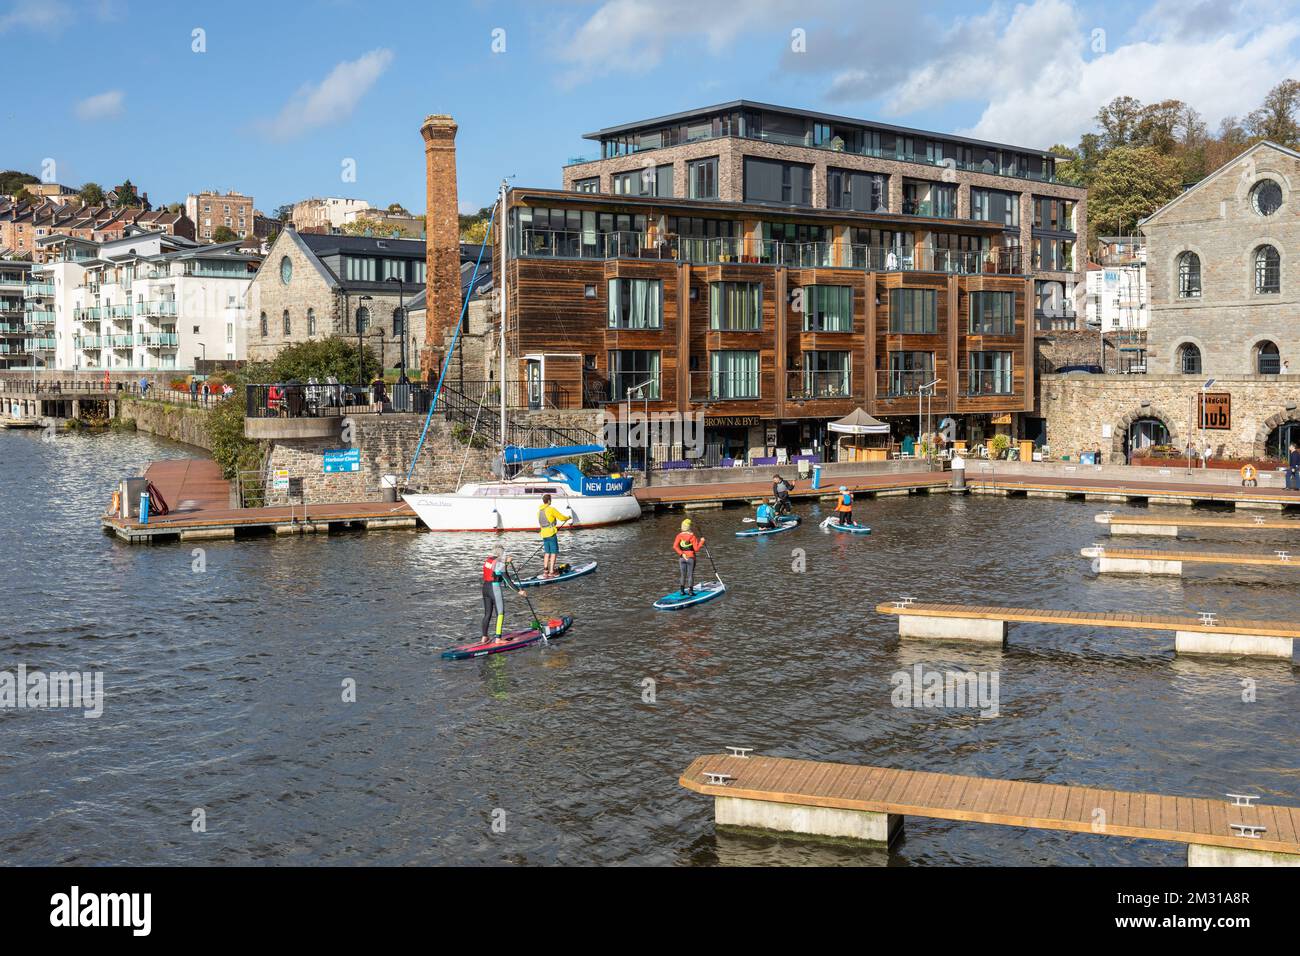 Group of stand up paddleboarders in Bristol's Floating Harbour, Bristol Harbourside, City of Bristol, England, UK Stock Photo